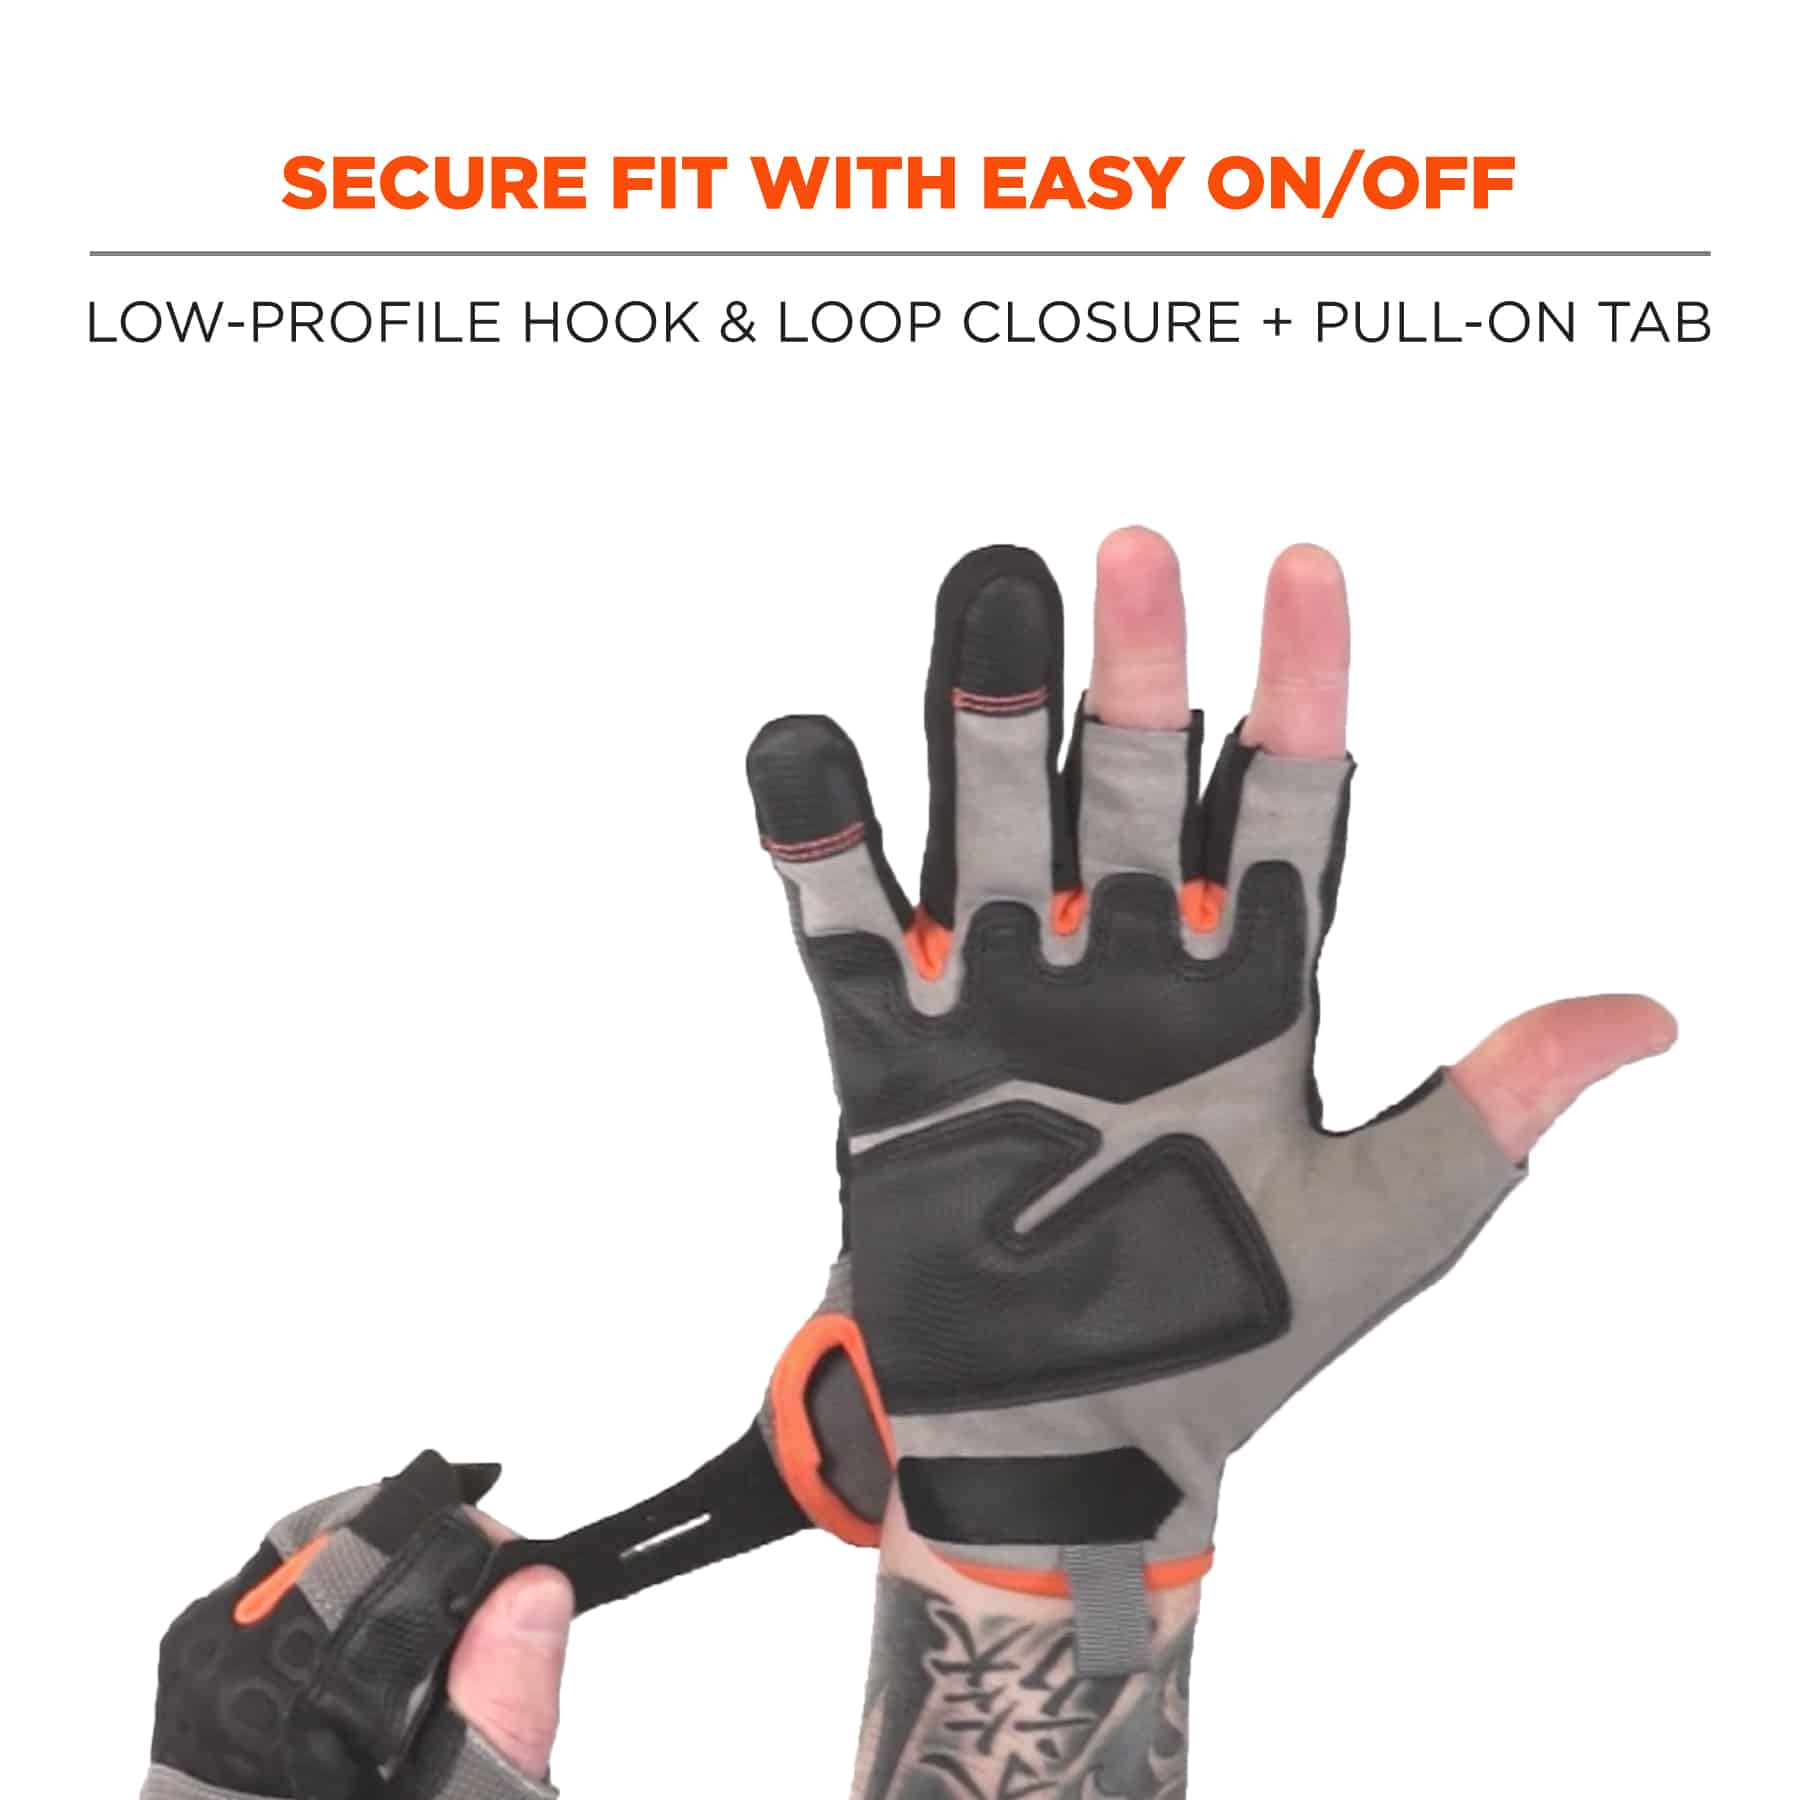 https://www.ergodyne.com/sites/default/files/product-images/17112-720-heavy-duty-framing-gloves-secure-fit-with-easy-on-off.jpg